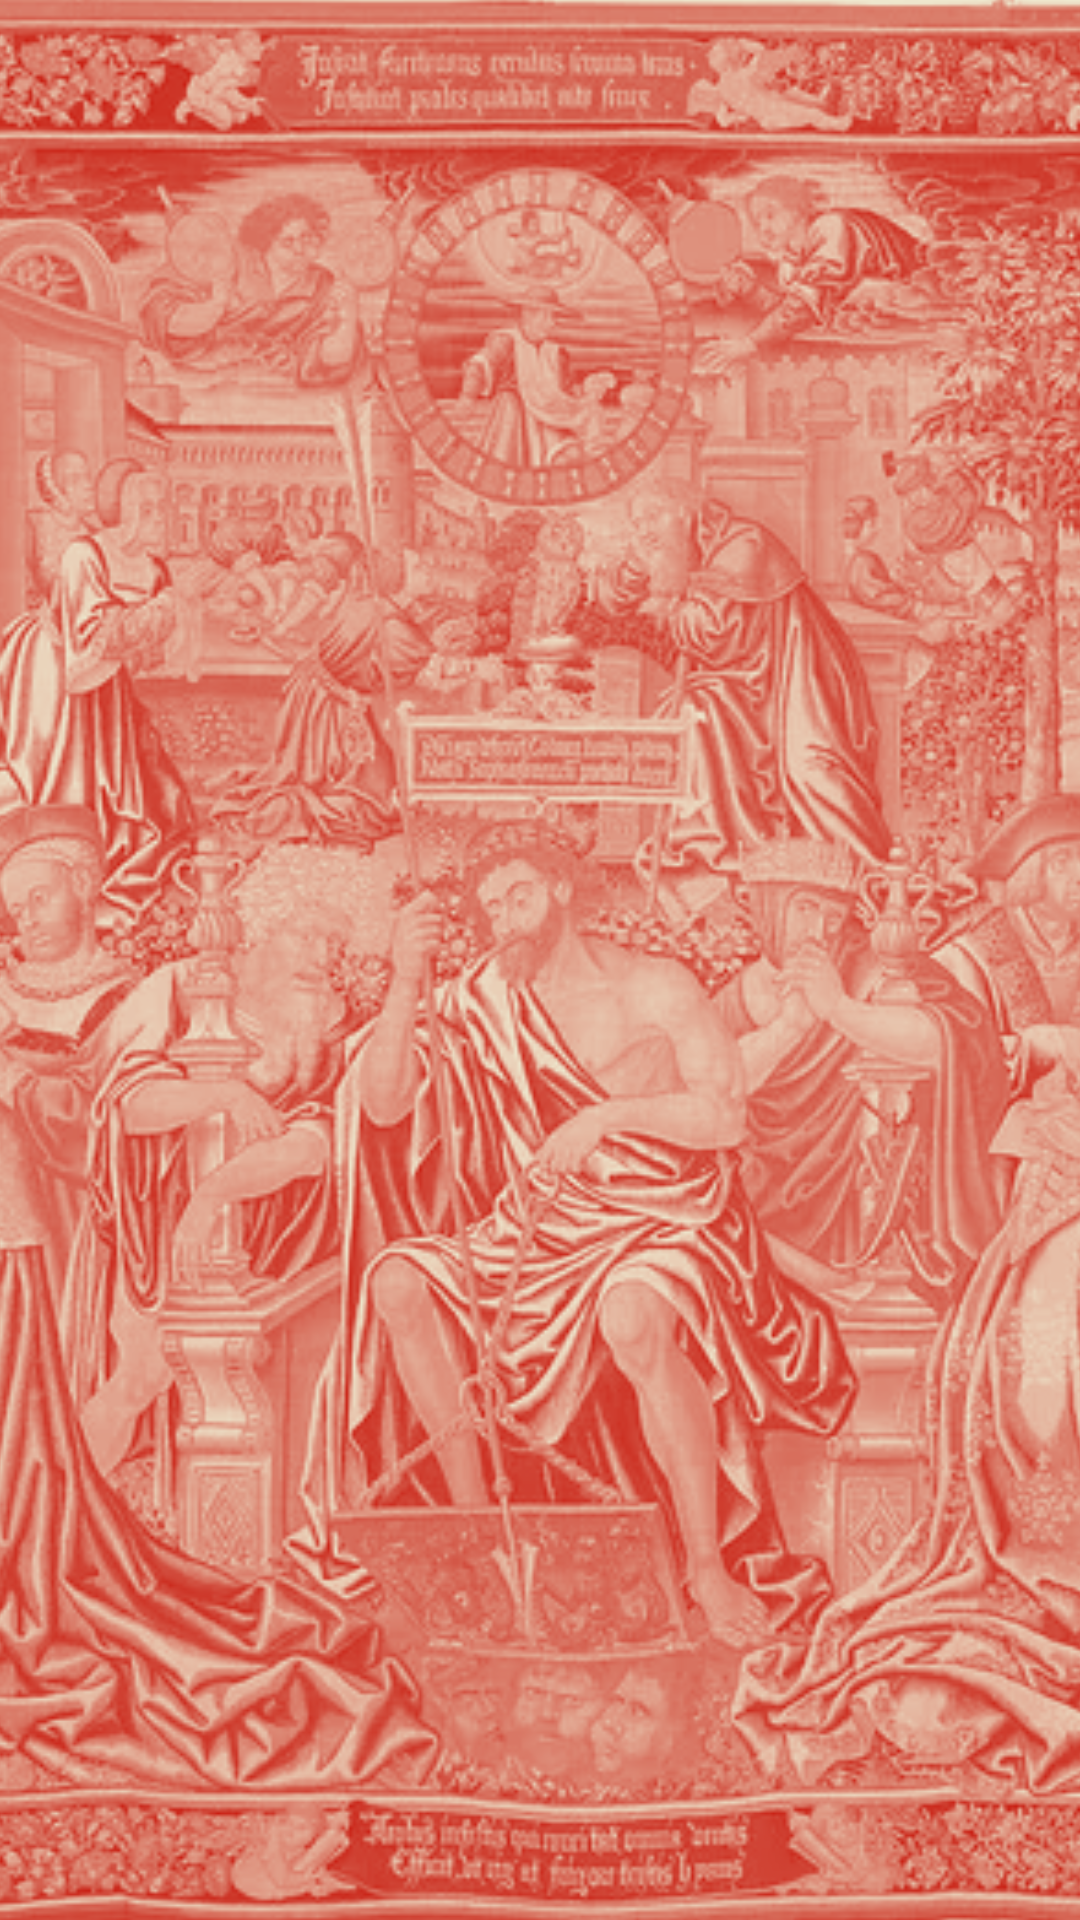 A zoomed in colour edited pink version of The Twelve Ages of a Man: The Last Three Ages (54-72), or Winter. Probably after a design by the Workshop of Bernard van Orley (life dates) Netherlandish, Ca. 1515.